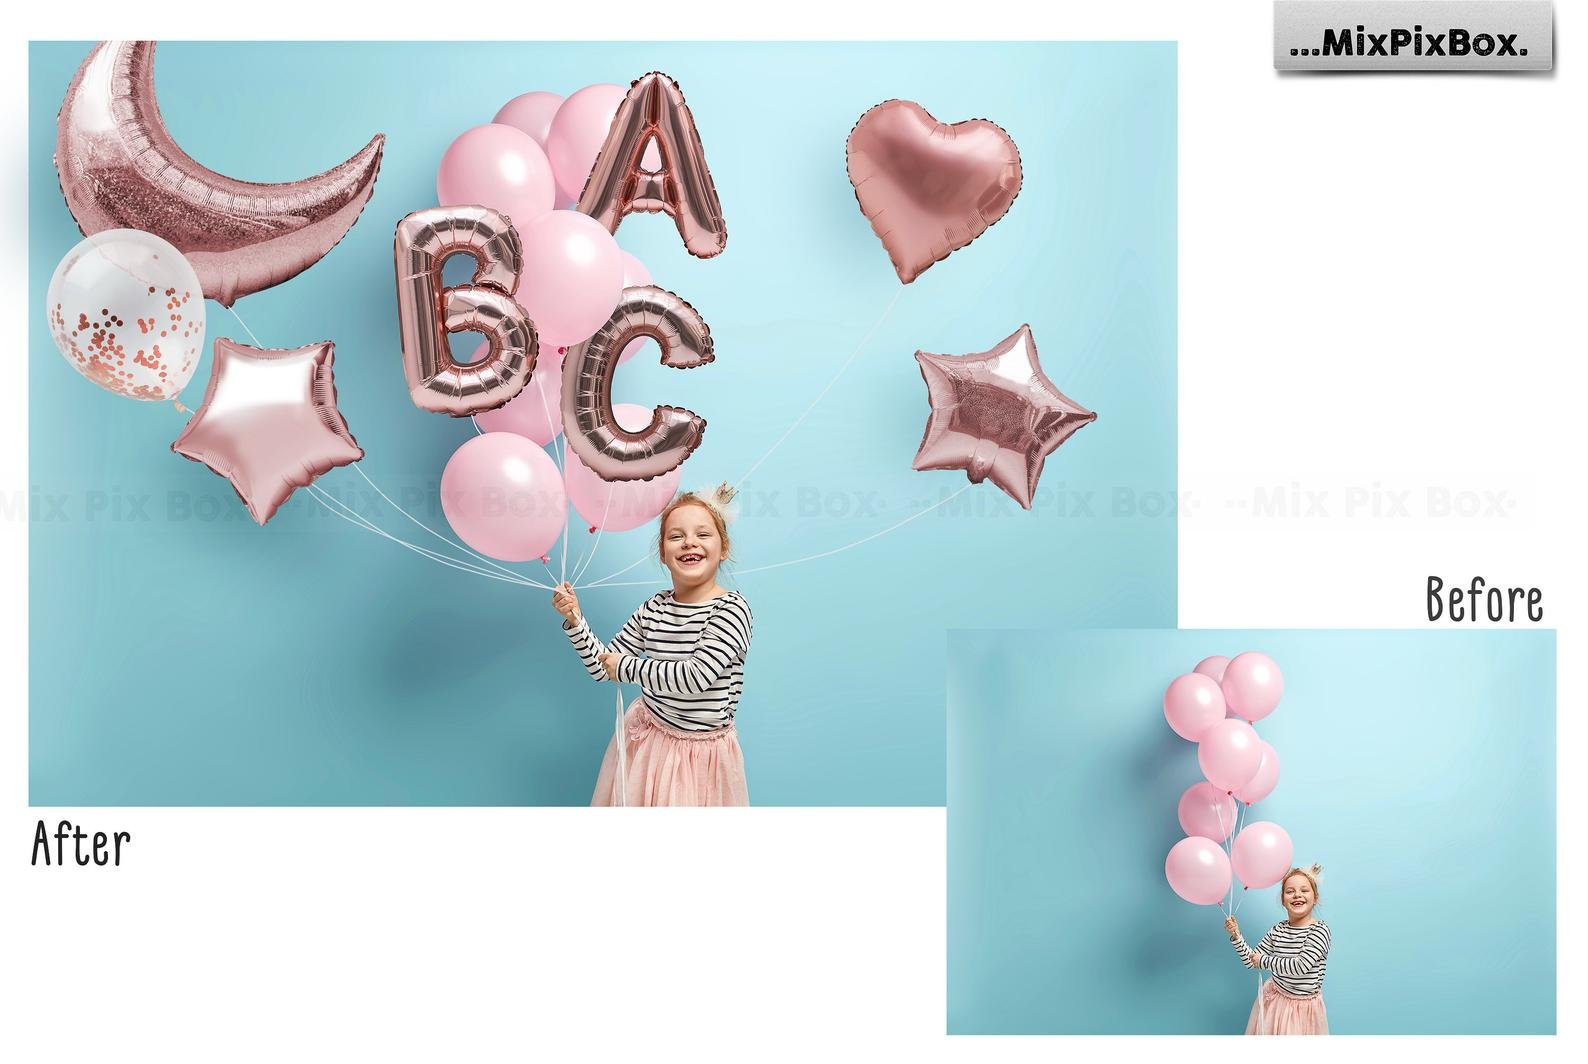 Rose Gold Foil Balloons Overlays